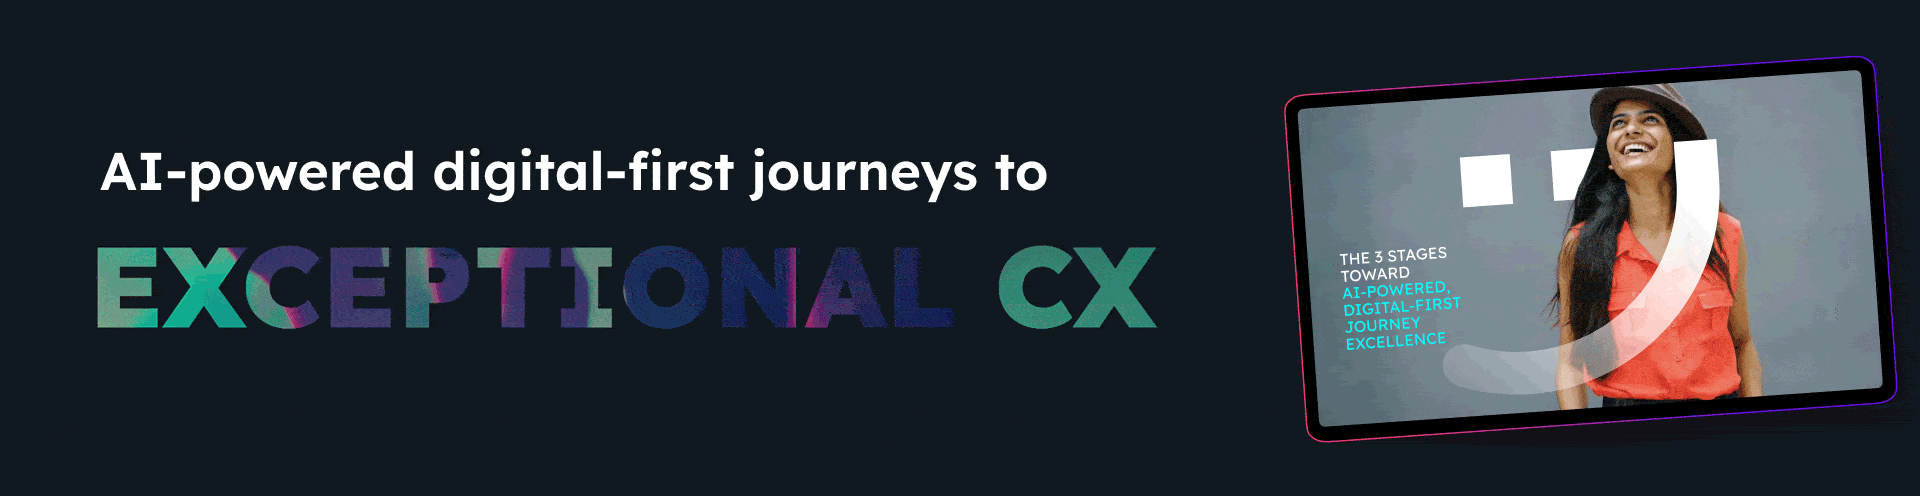 AI-powered digital-first journeys to exceptional CX